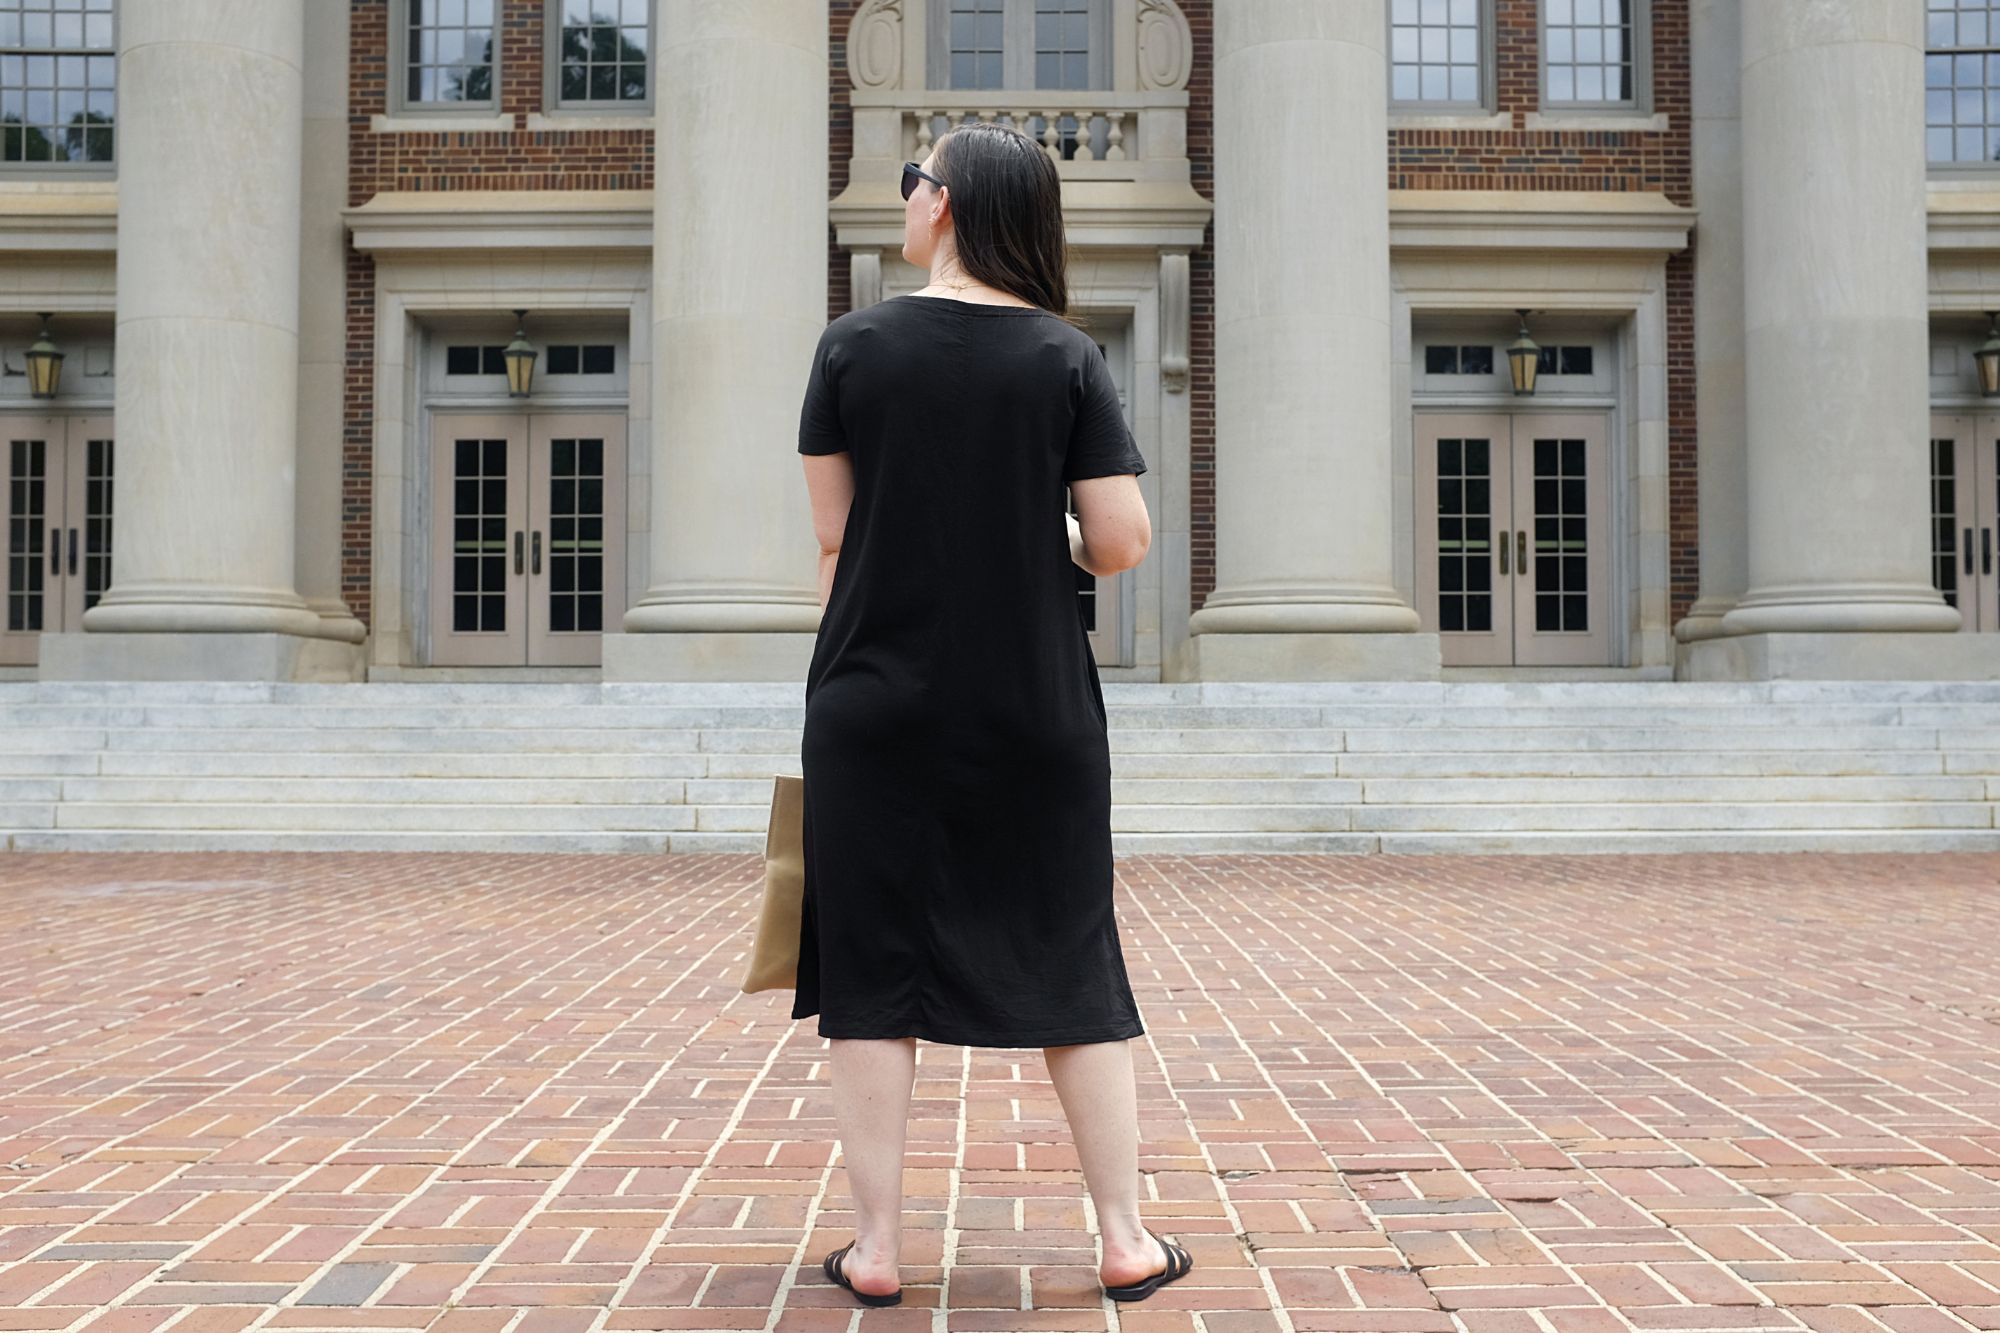 Alyssa stands and looks at a building on campus at Davidson College